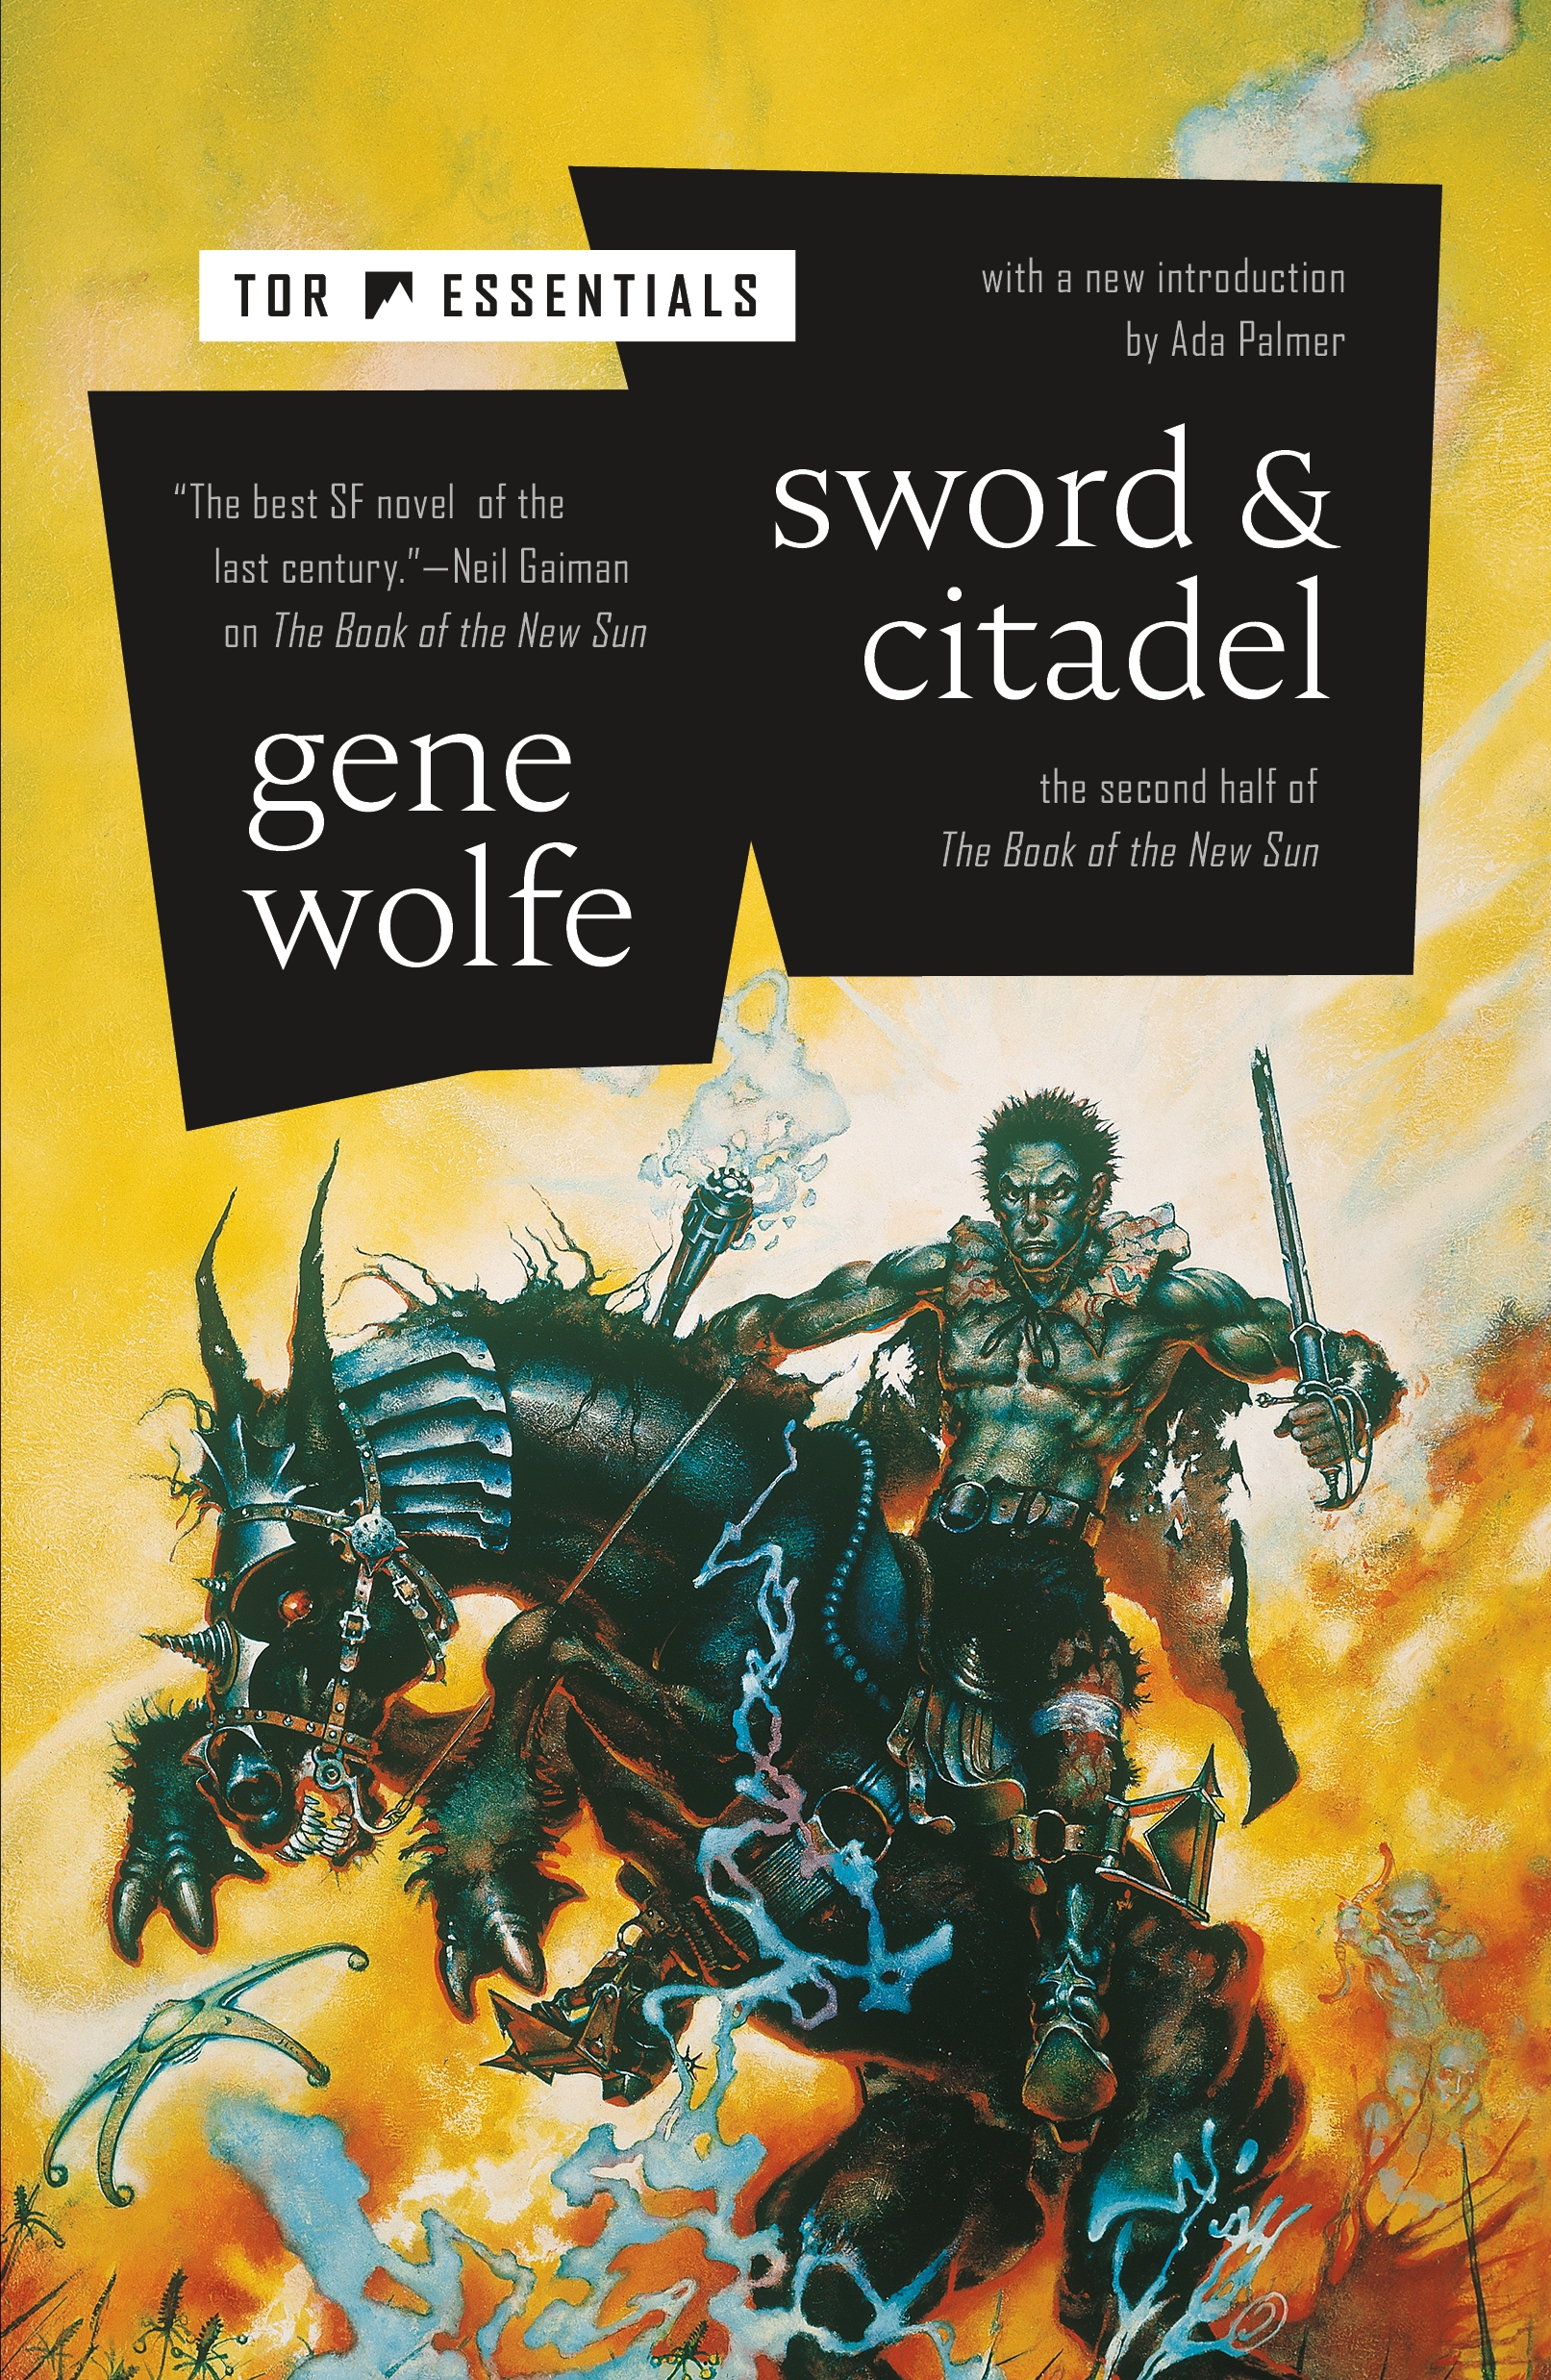 Sword & Citadel : The Second Half of The Book of the New Sun by Gene Wolfe